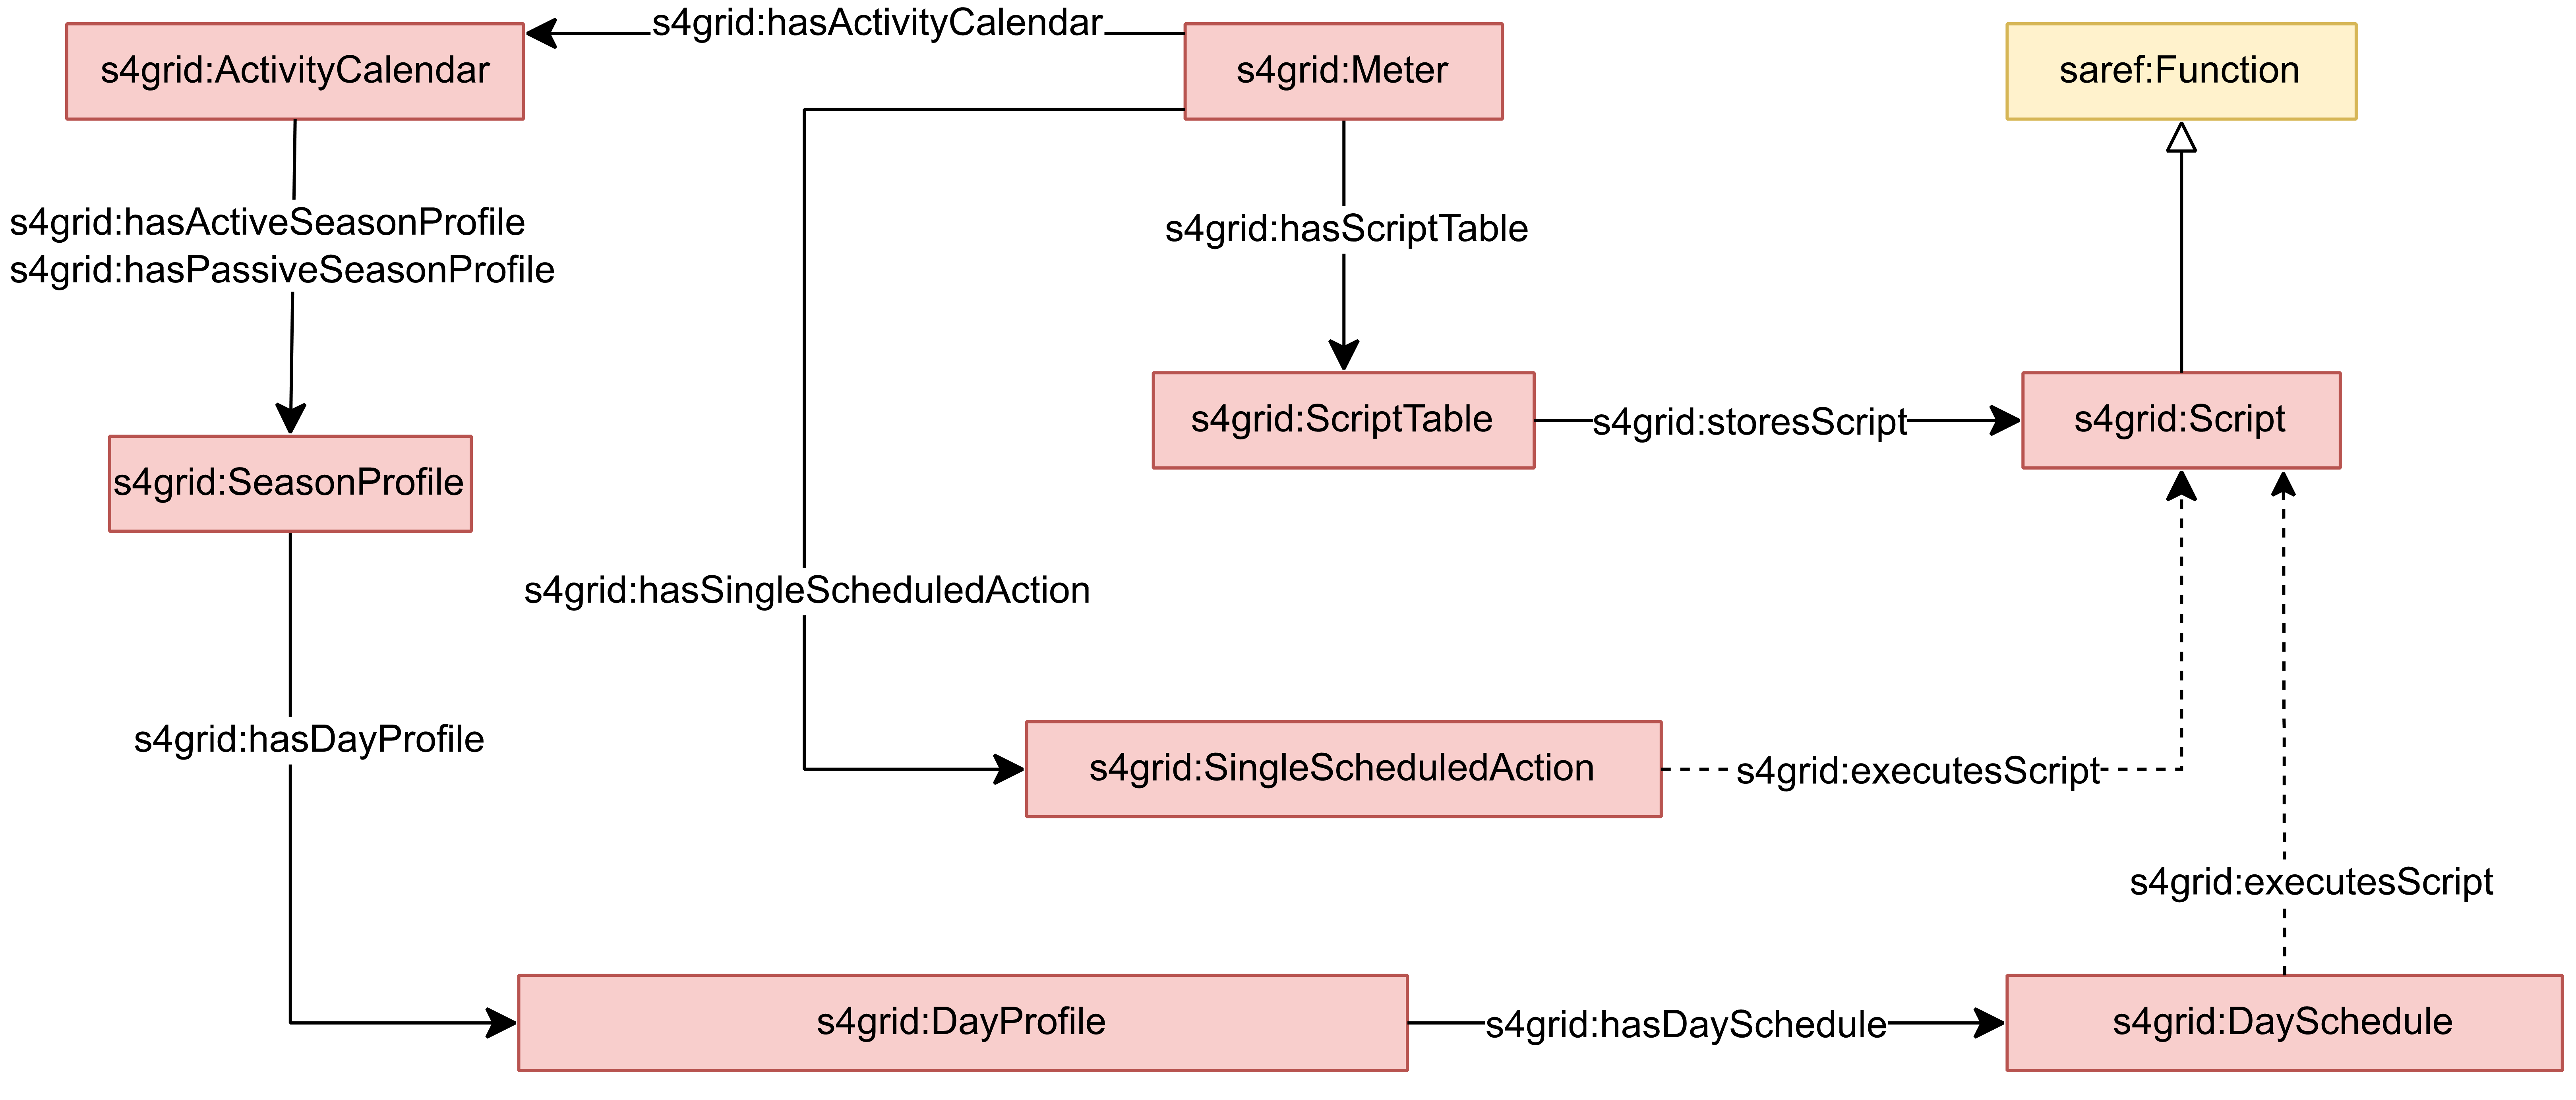 SAREF4GRID overview: Activity calendar and scripts